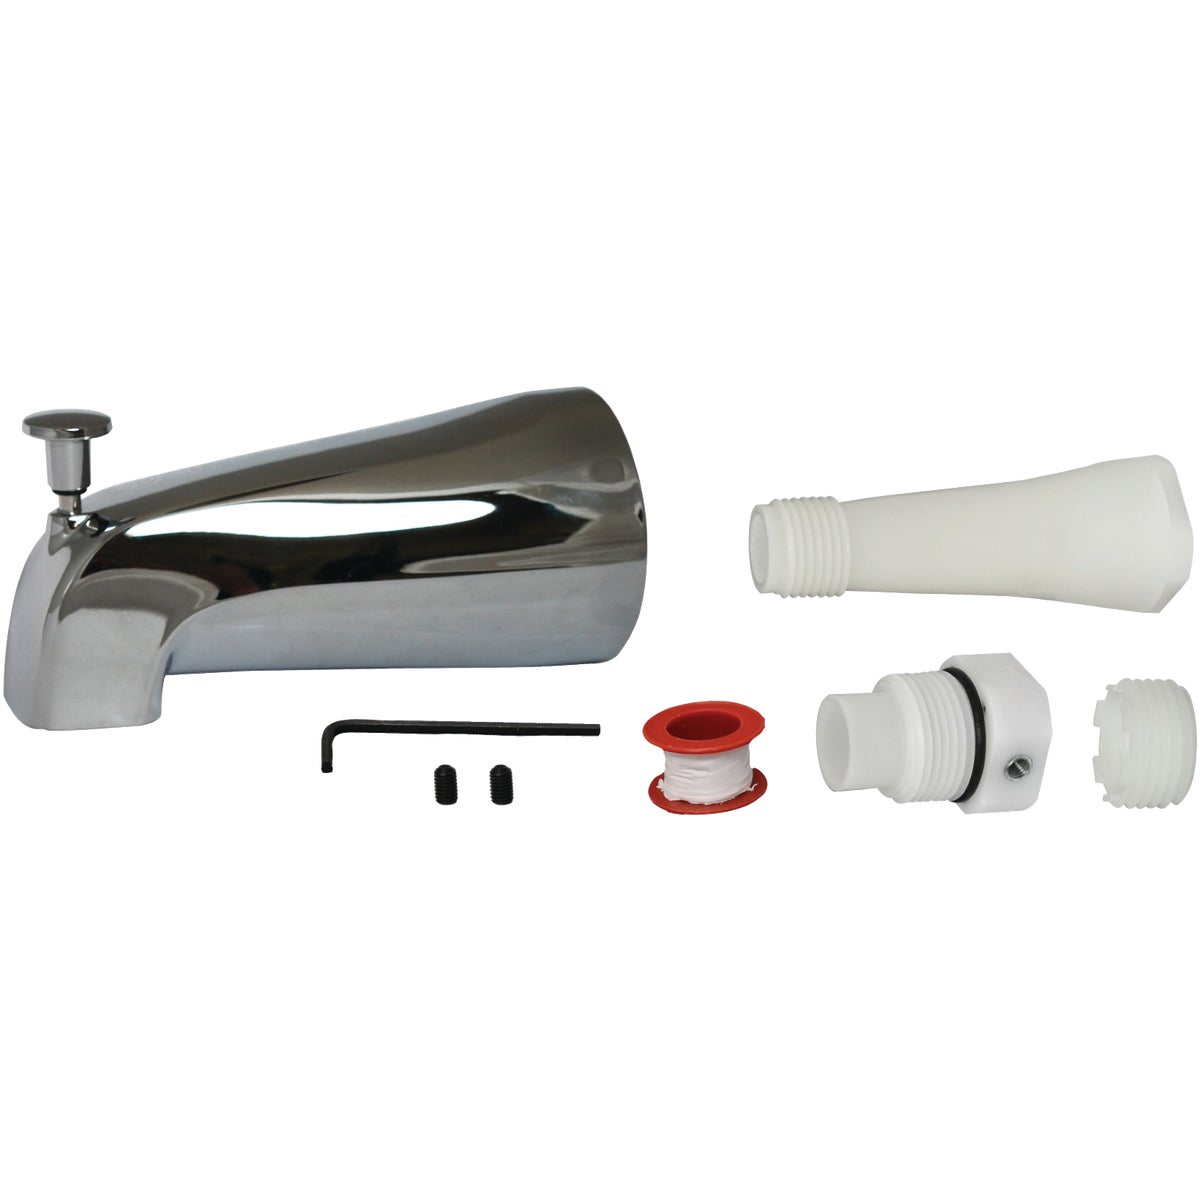 Item 417422, Universal fit repair or replacement bathtub spout with diverter.